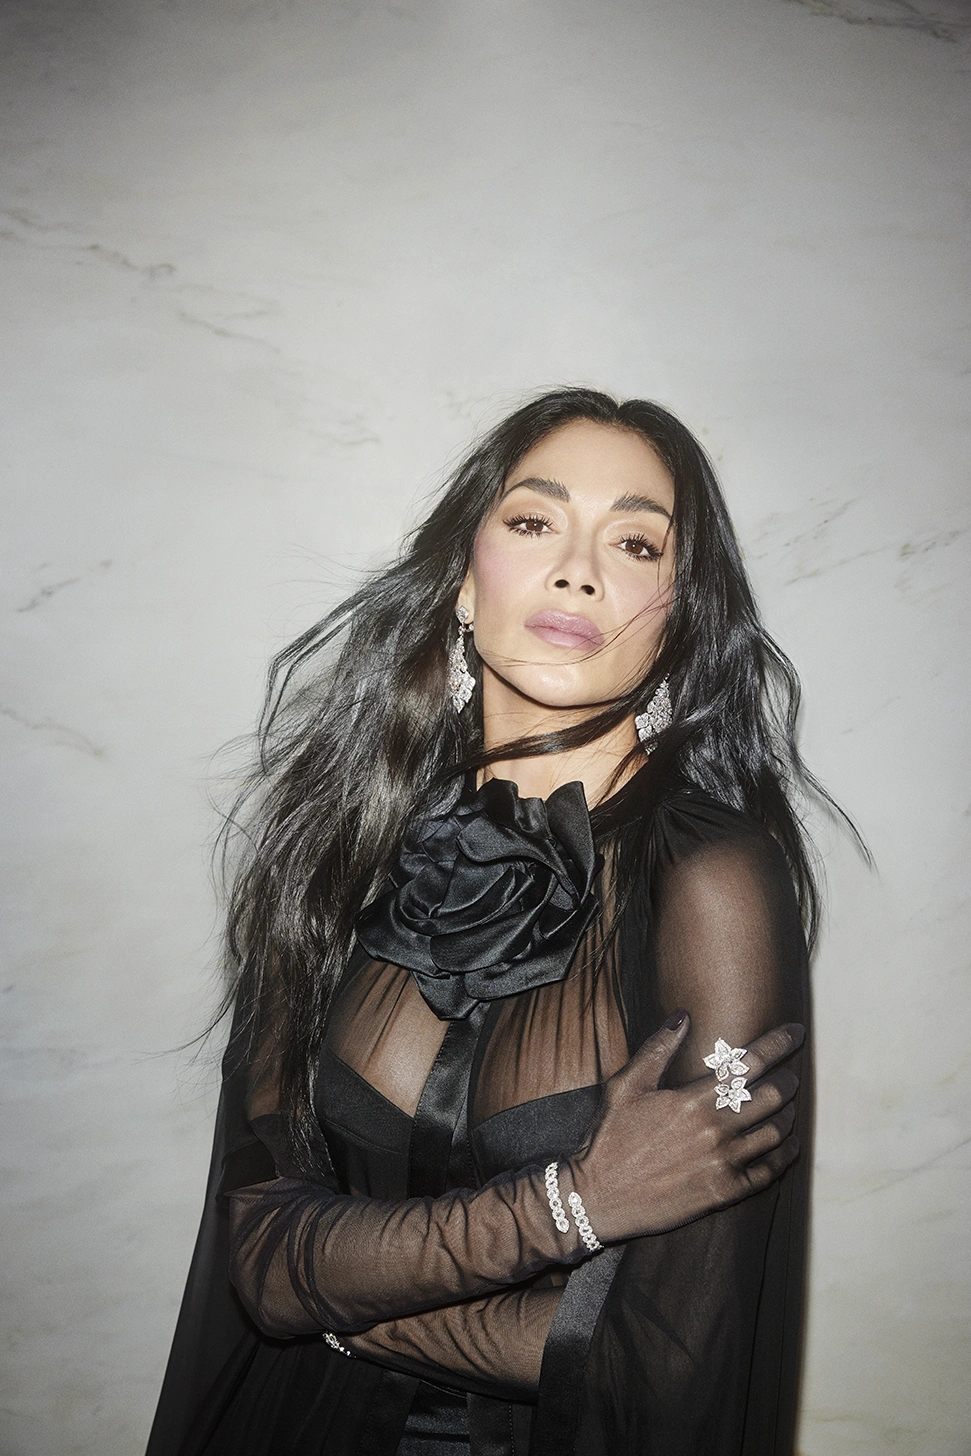 Nicole Scherzinger Inteview: On Theatre, Fame And London